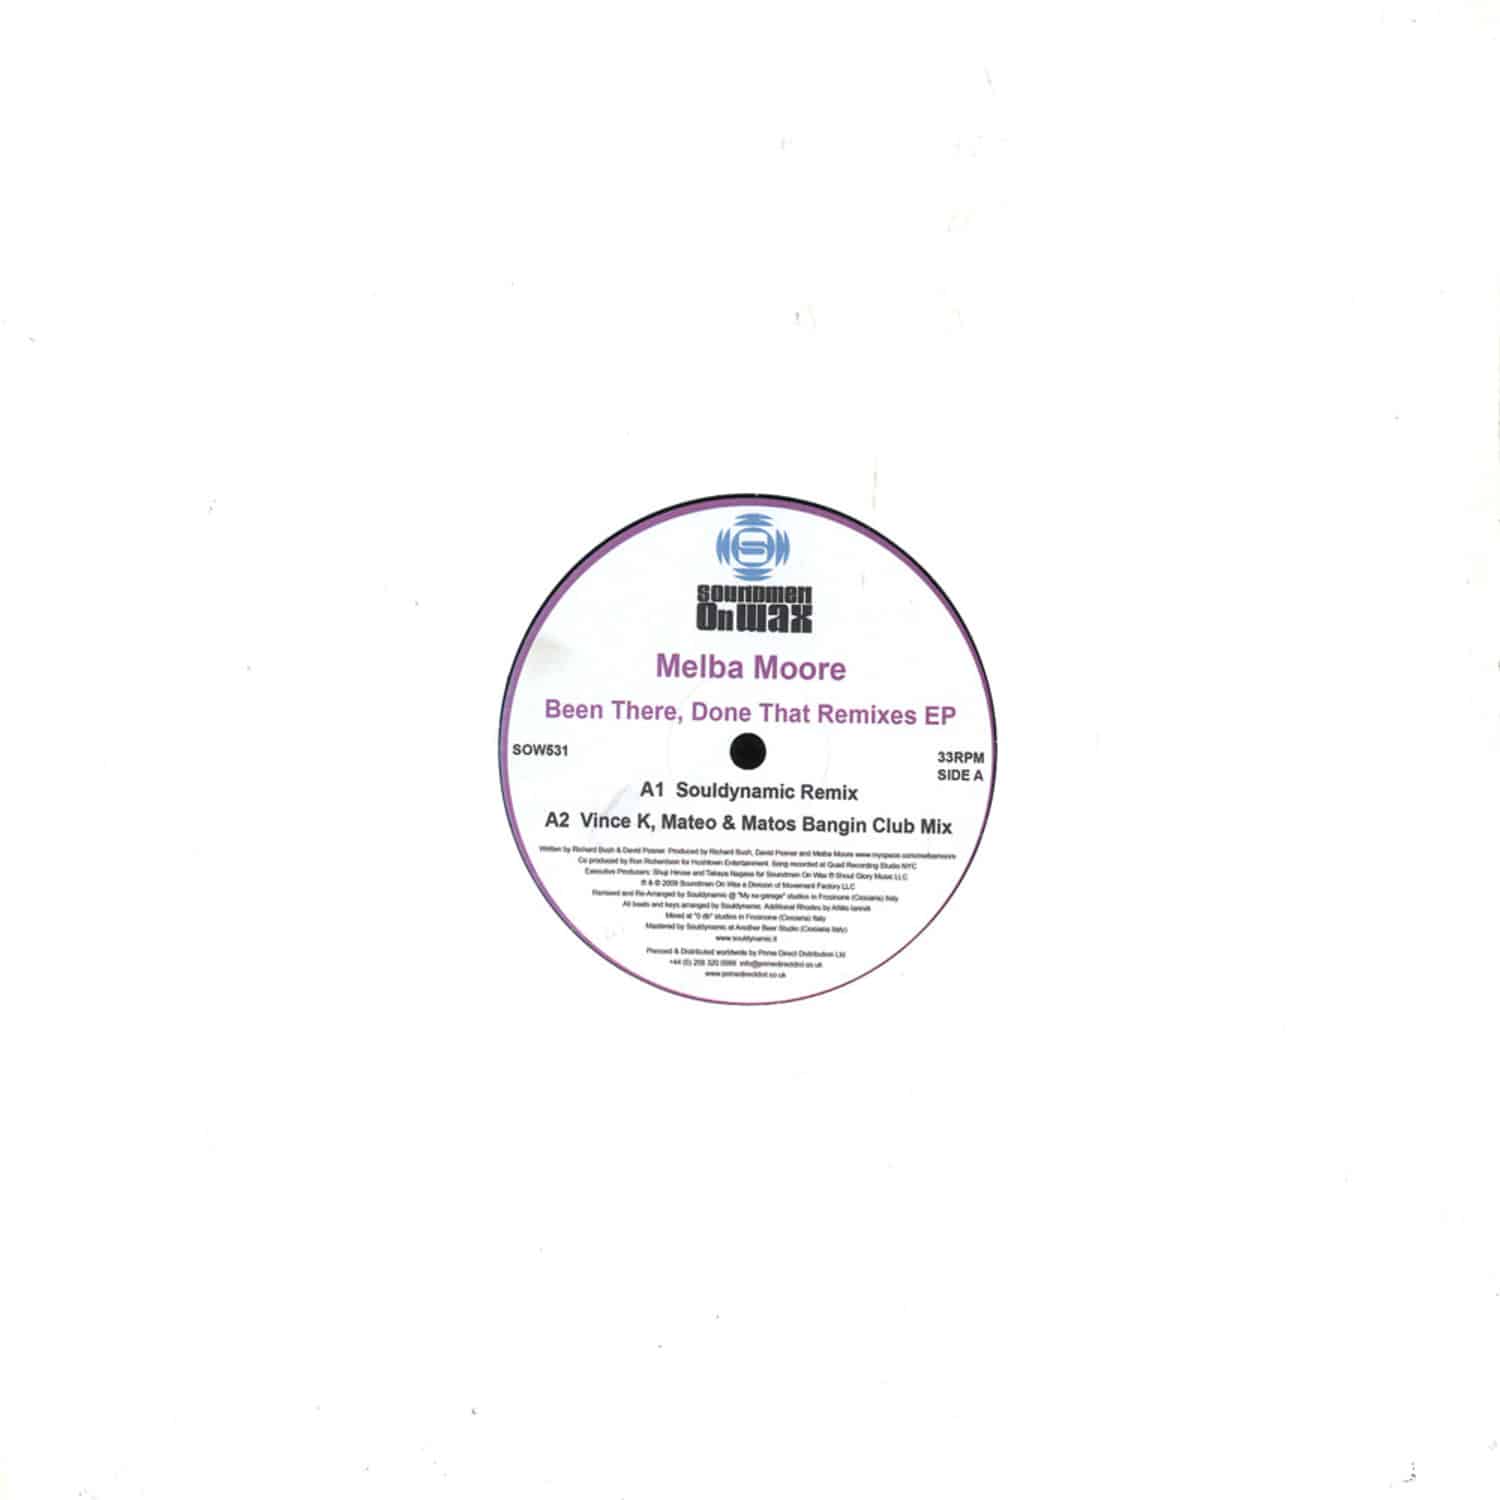 Melba Moore - BEEN THERE DONE THAT REMIXES EP